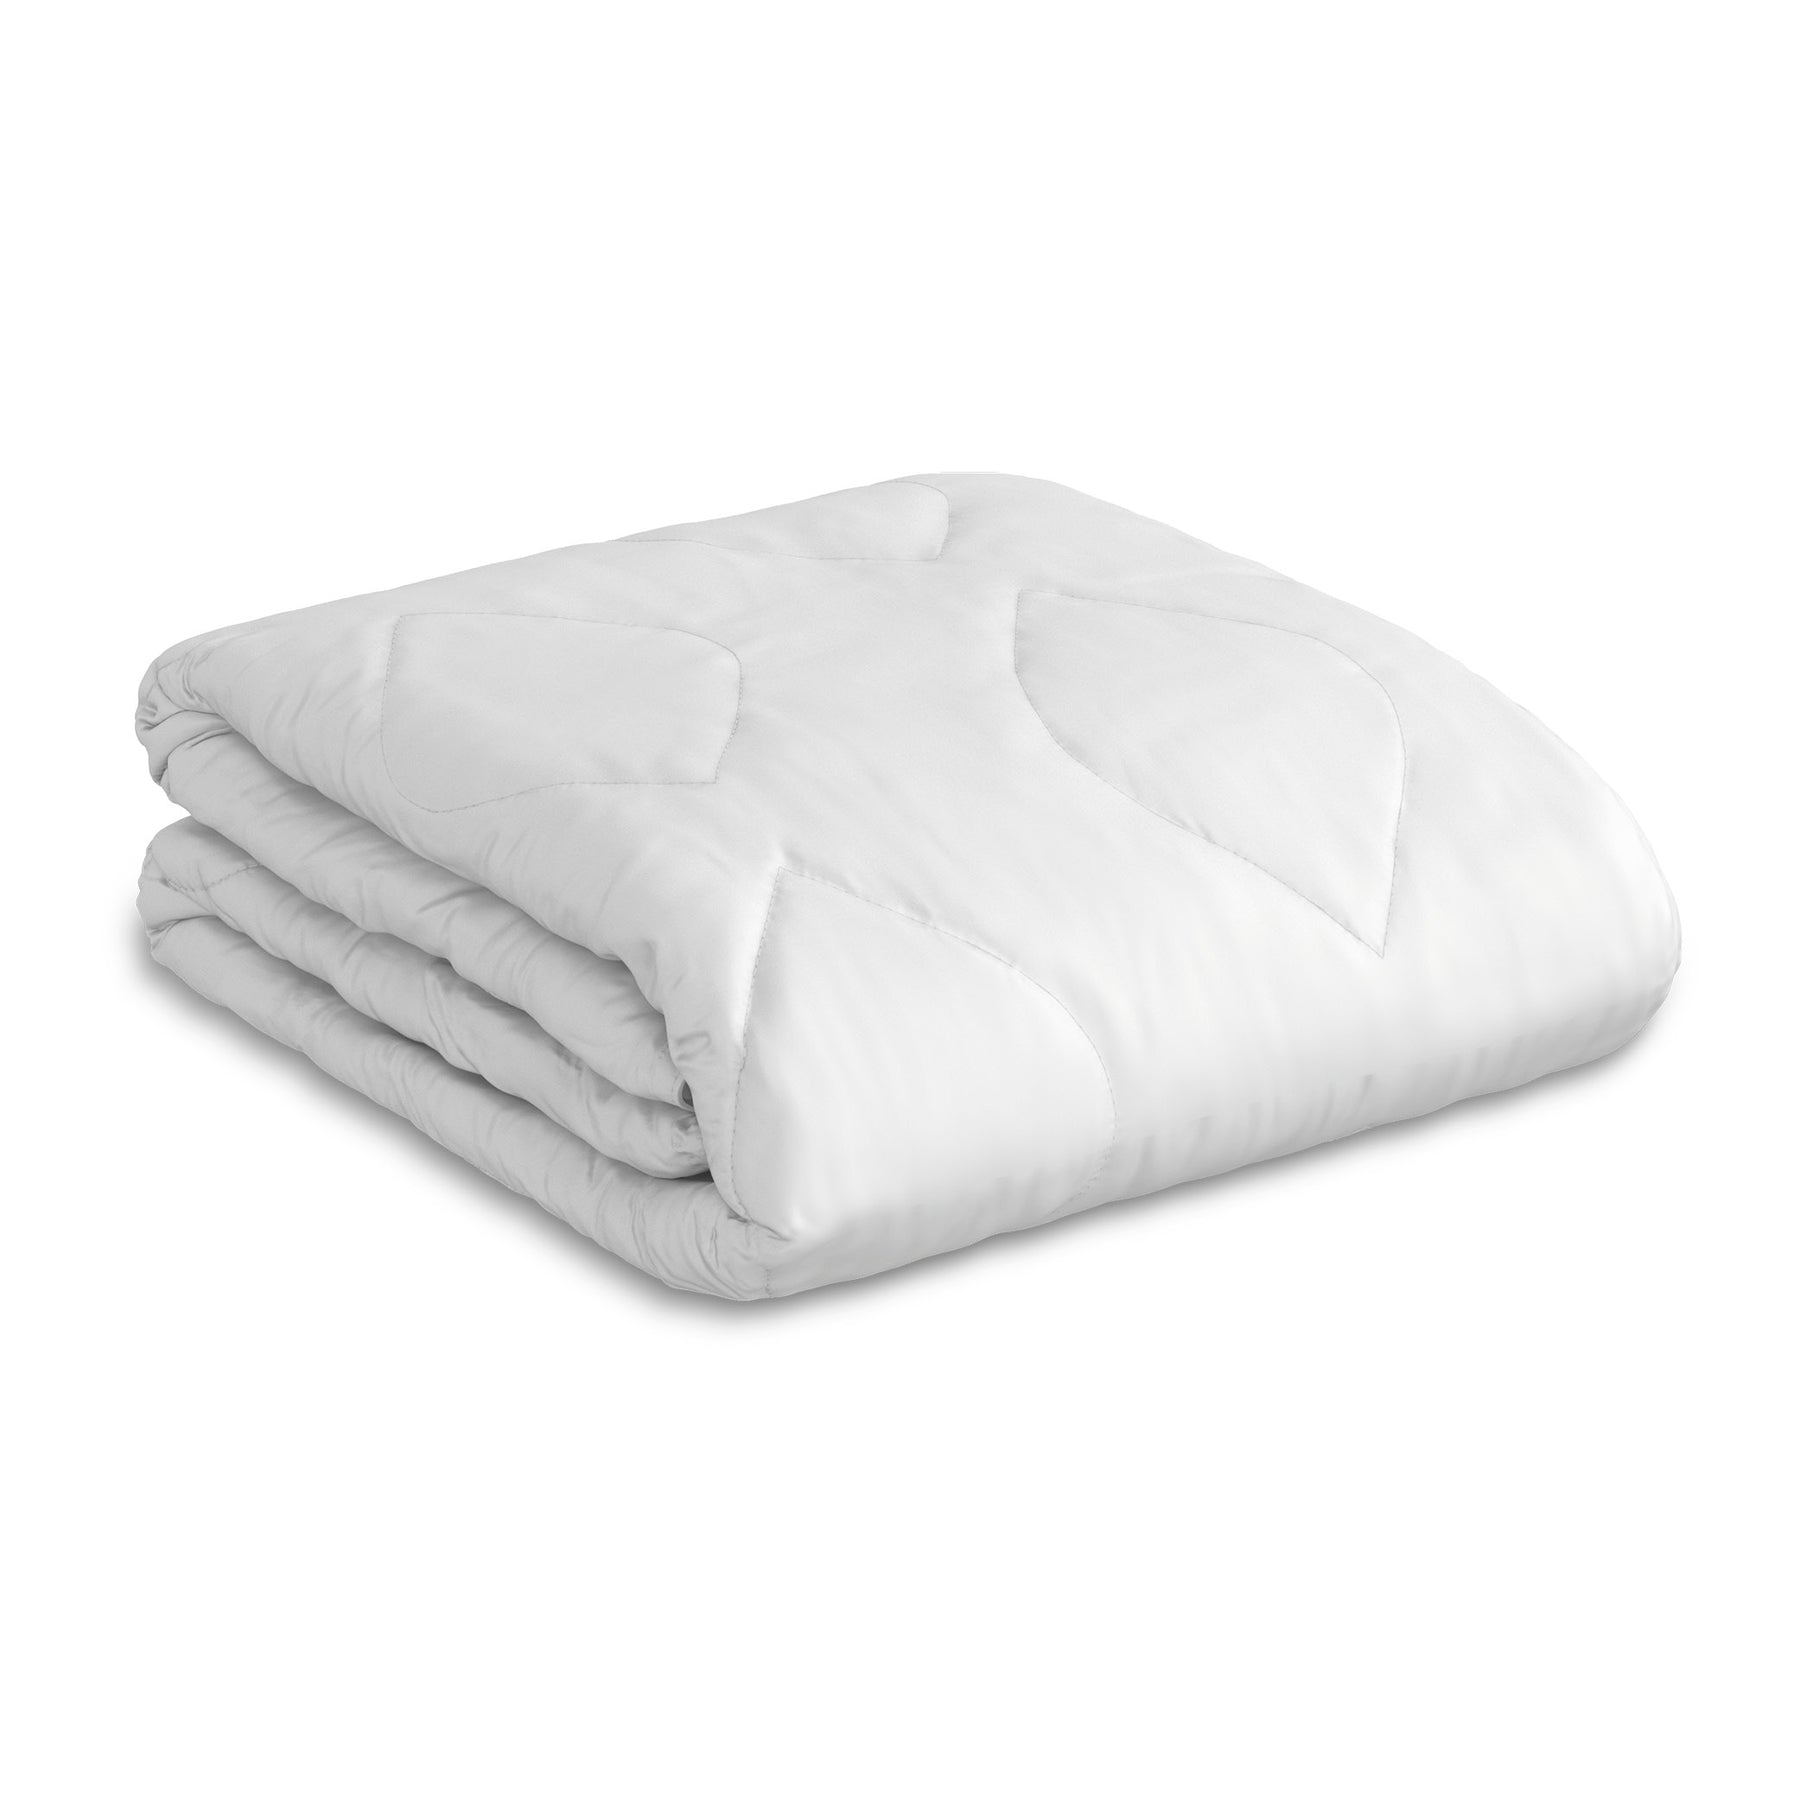 Image of a neatly folded Soft Touch Duvet Insert on a white background